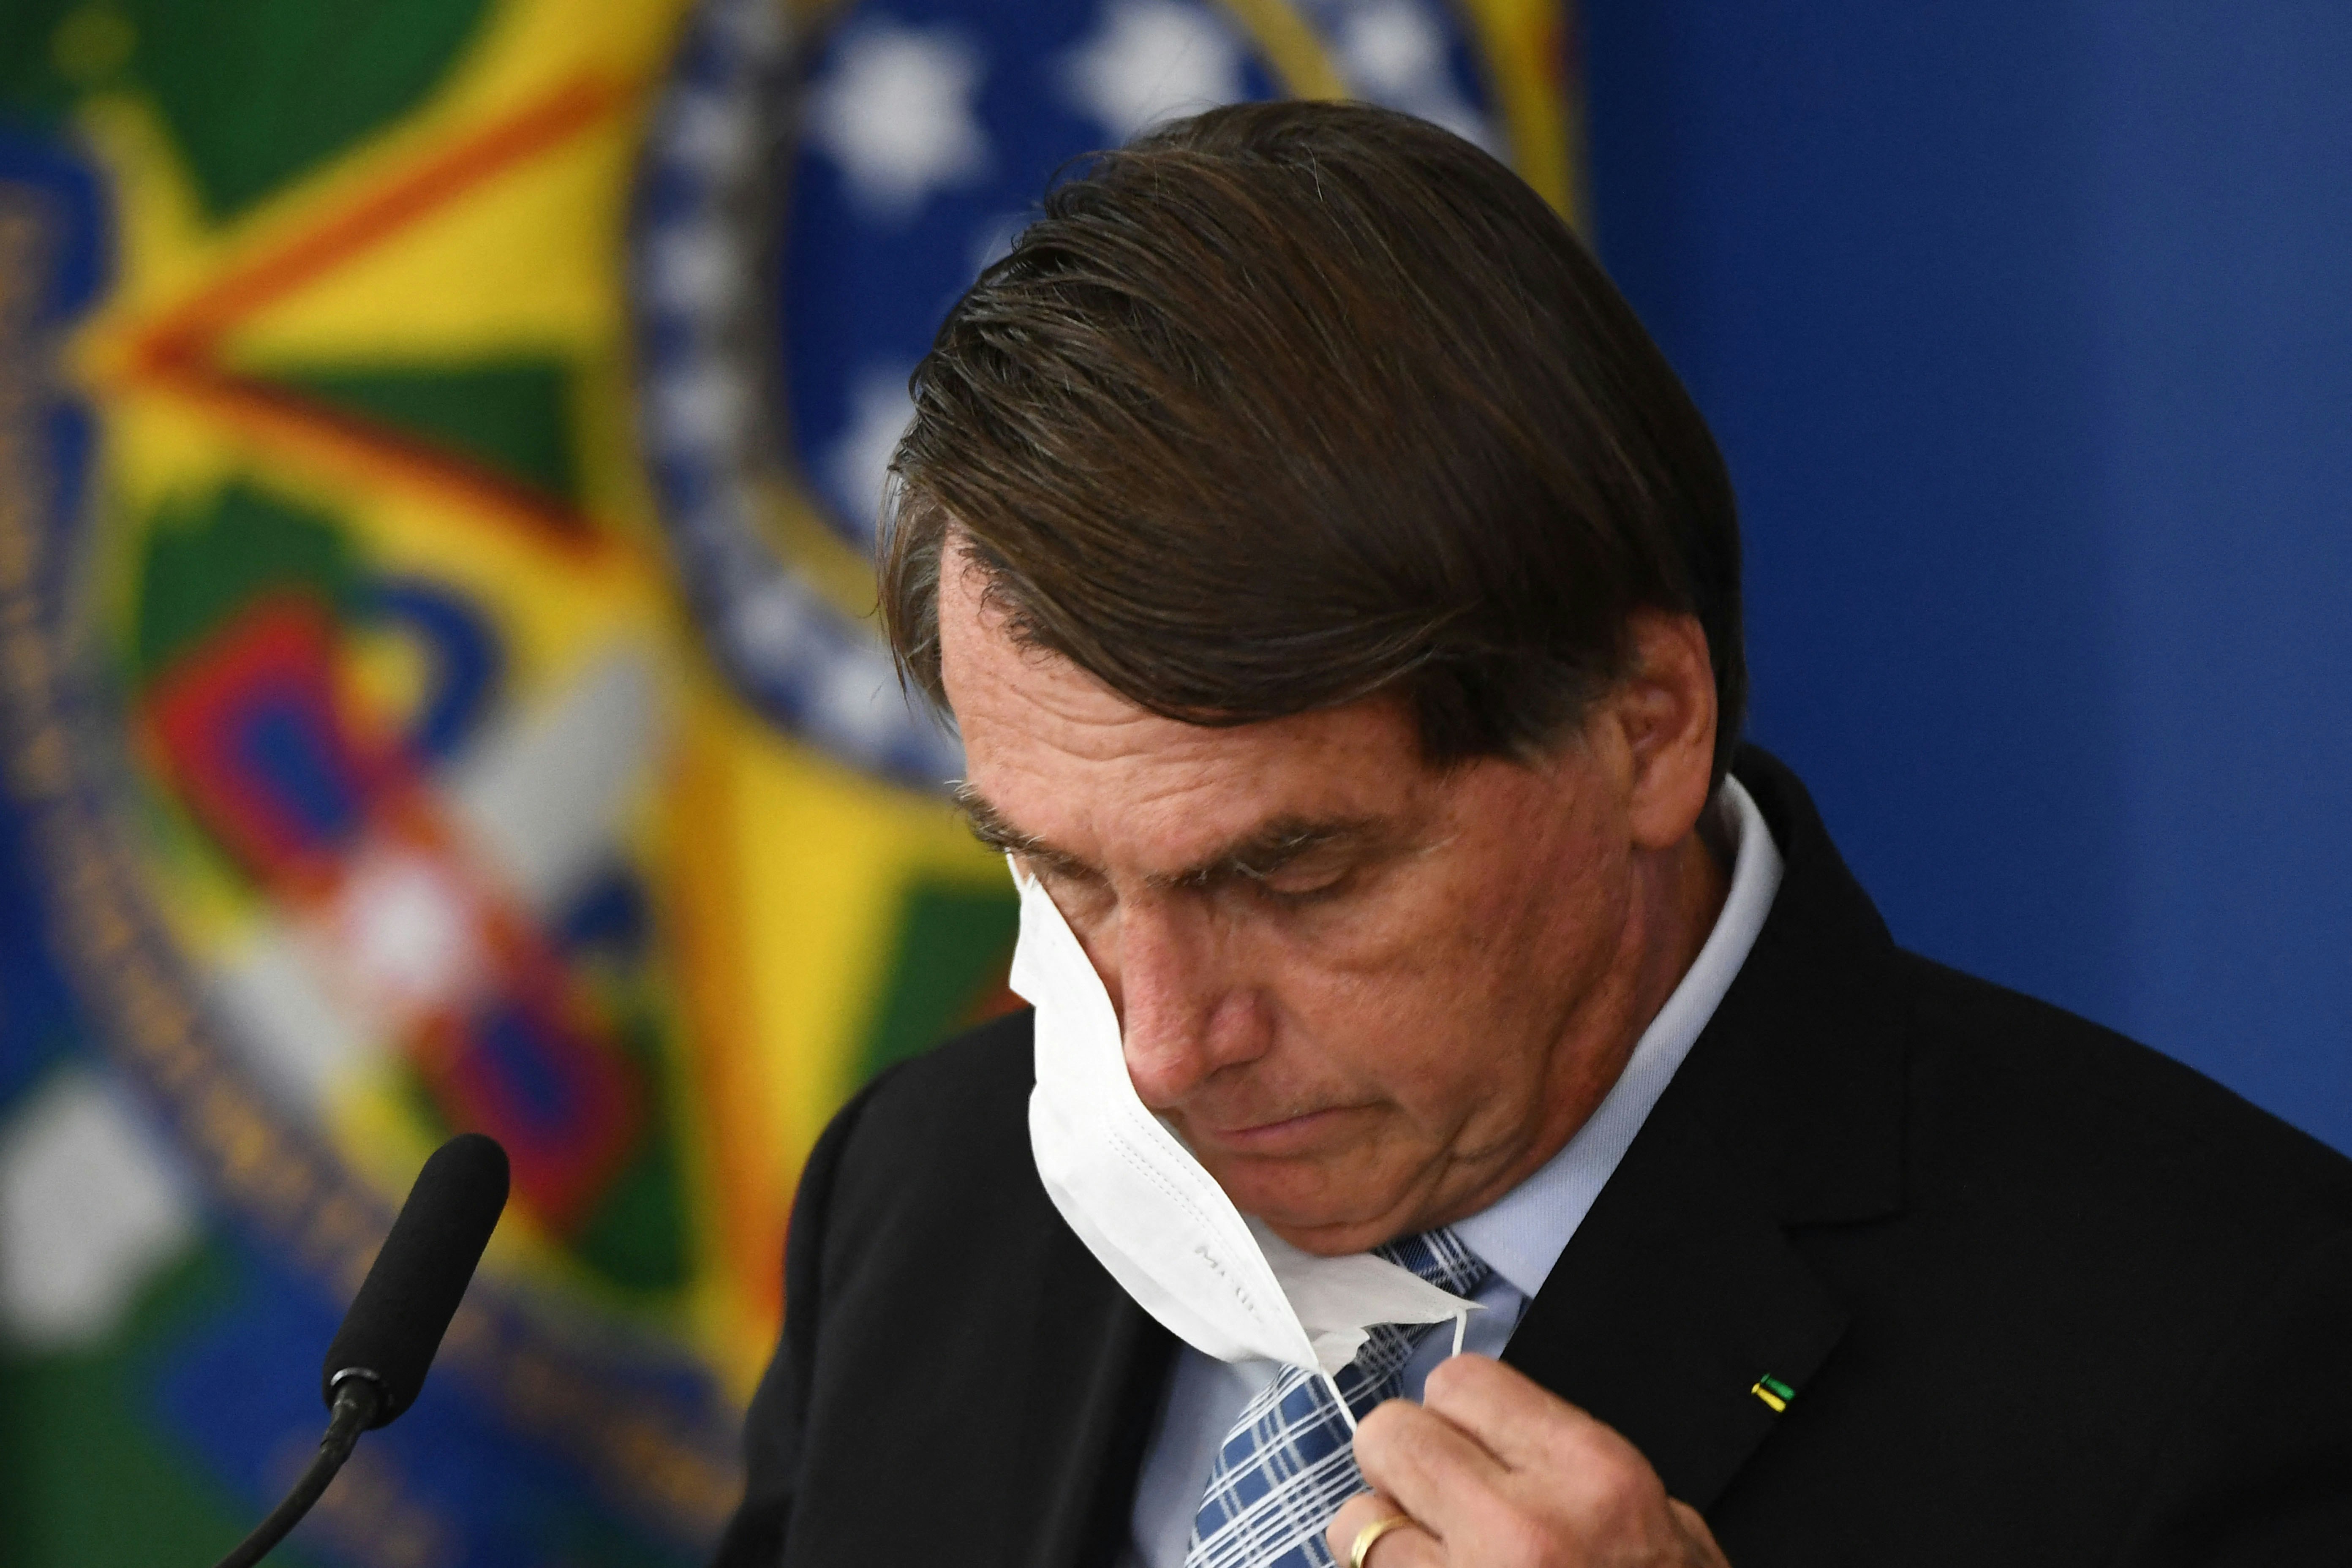 Brazilian President Jair Bolsonaro takes off his face mask before speaking during the sanction of the law that authorizes states, municipalities and the private sector to buy vaccines against COVID-19, at the Planalto Palace in Brasilia, on March 10, 2021. - Until now, with more than 260,000 deaths by the coronavirus, only the federal Government was authorized to buy vaccines. (Photo by EVARISTO SA / AFP) (Photo by EVARISTO SA/AFP via Getty Images)